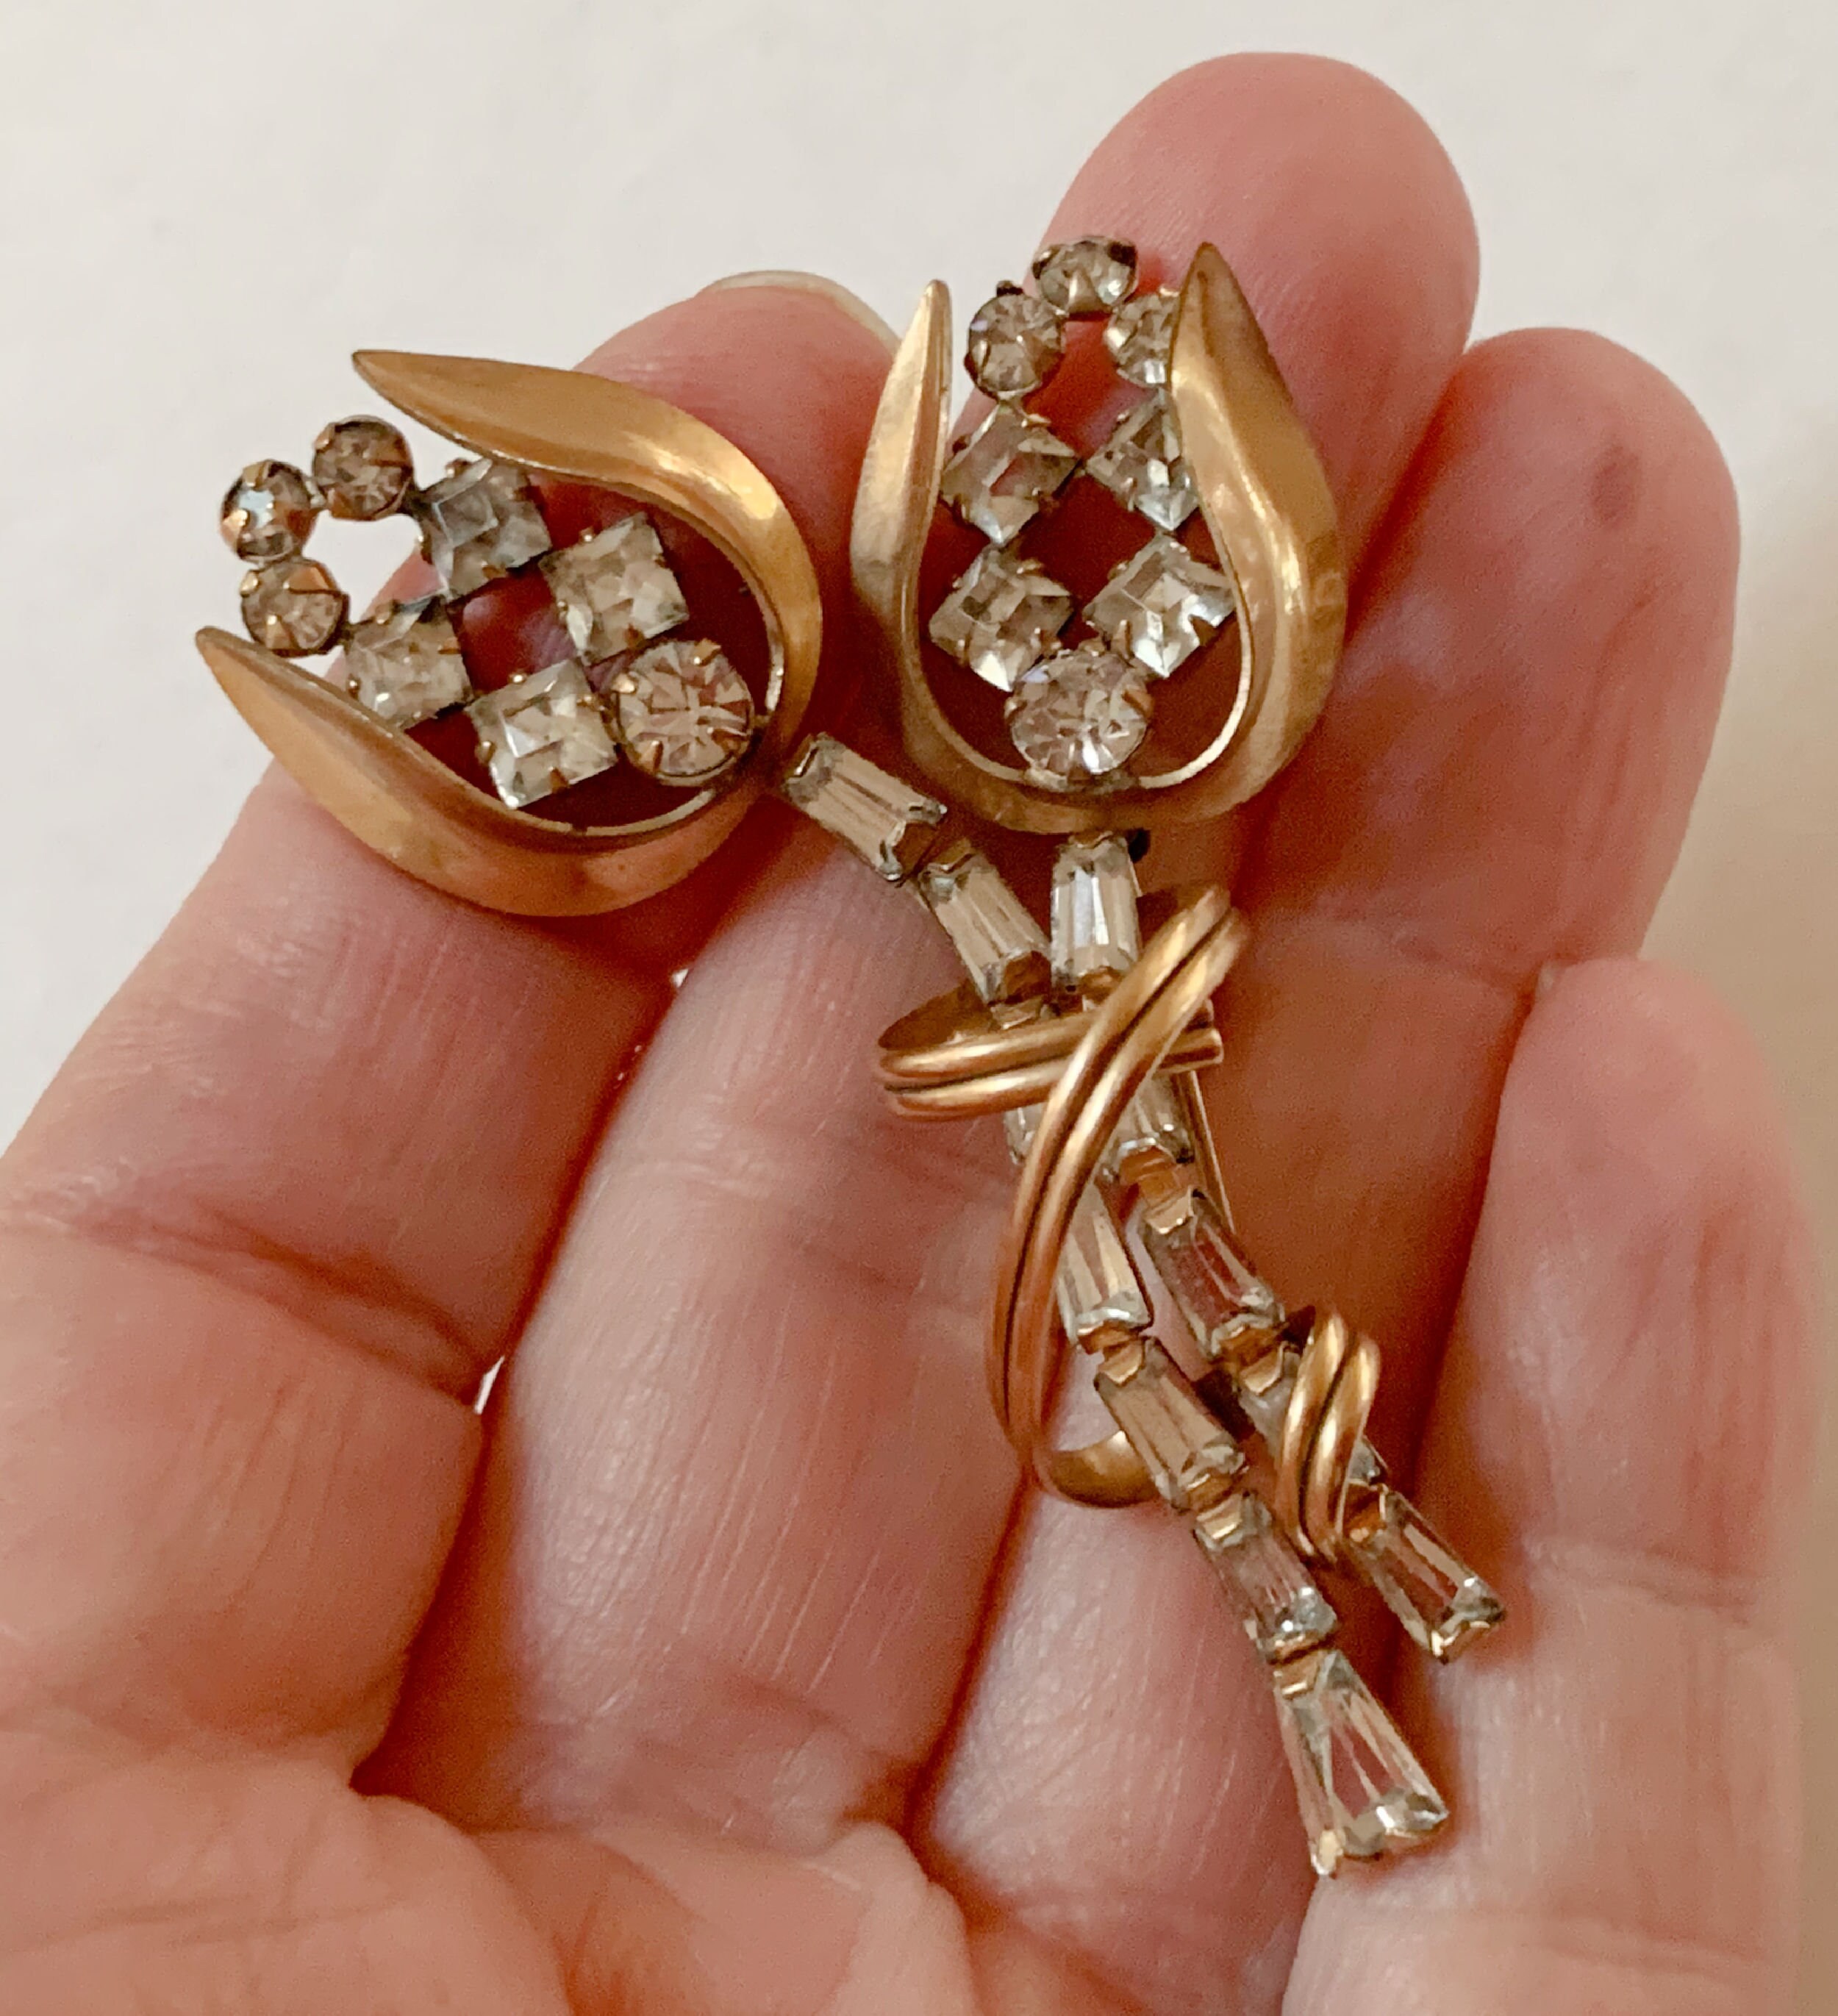 EMEGCY Tulip Brooches for Women Pearl Tulip Brooch Pins Tulip Rhinestone  Brooch Gold-plated Tulip Lapel Pin Jewelry Christmas Gift for Wife Mom Girls